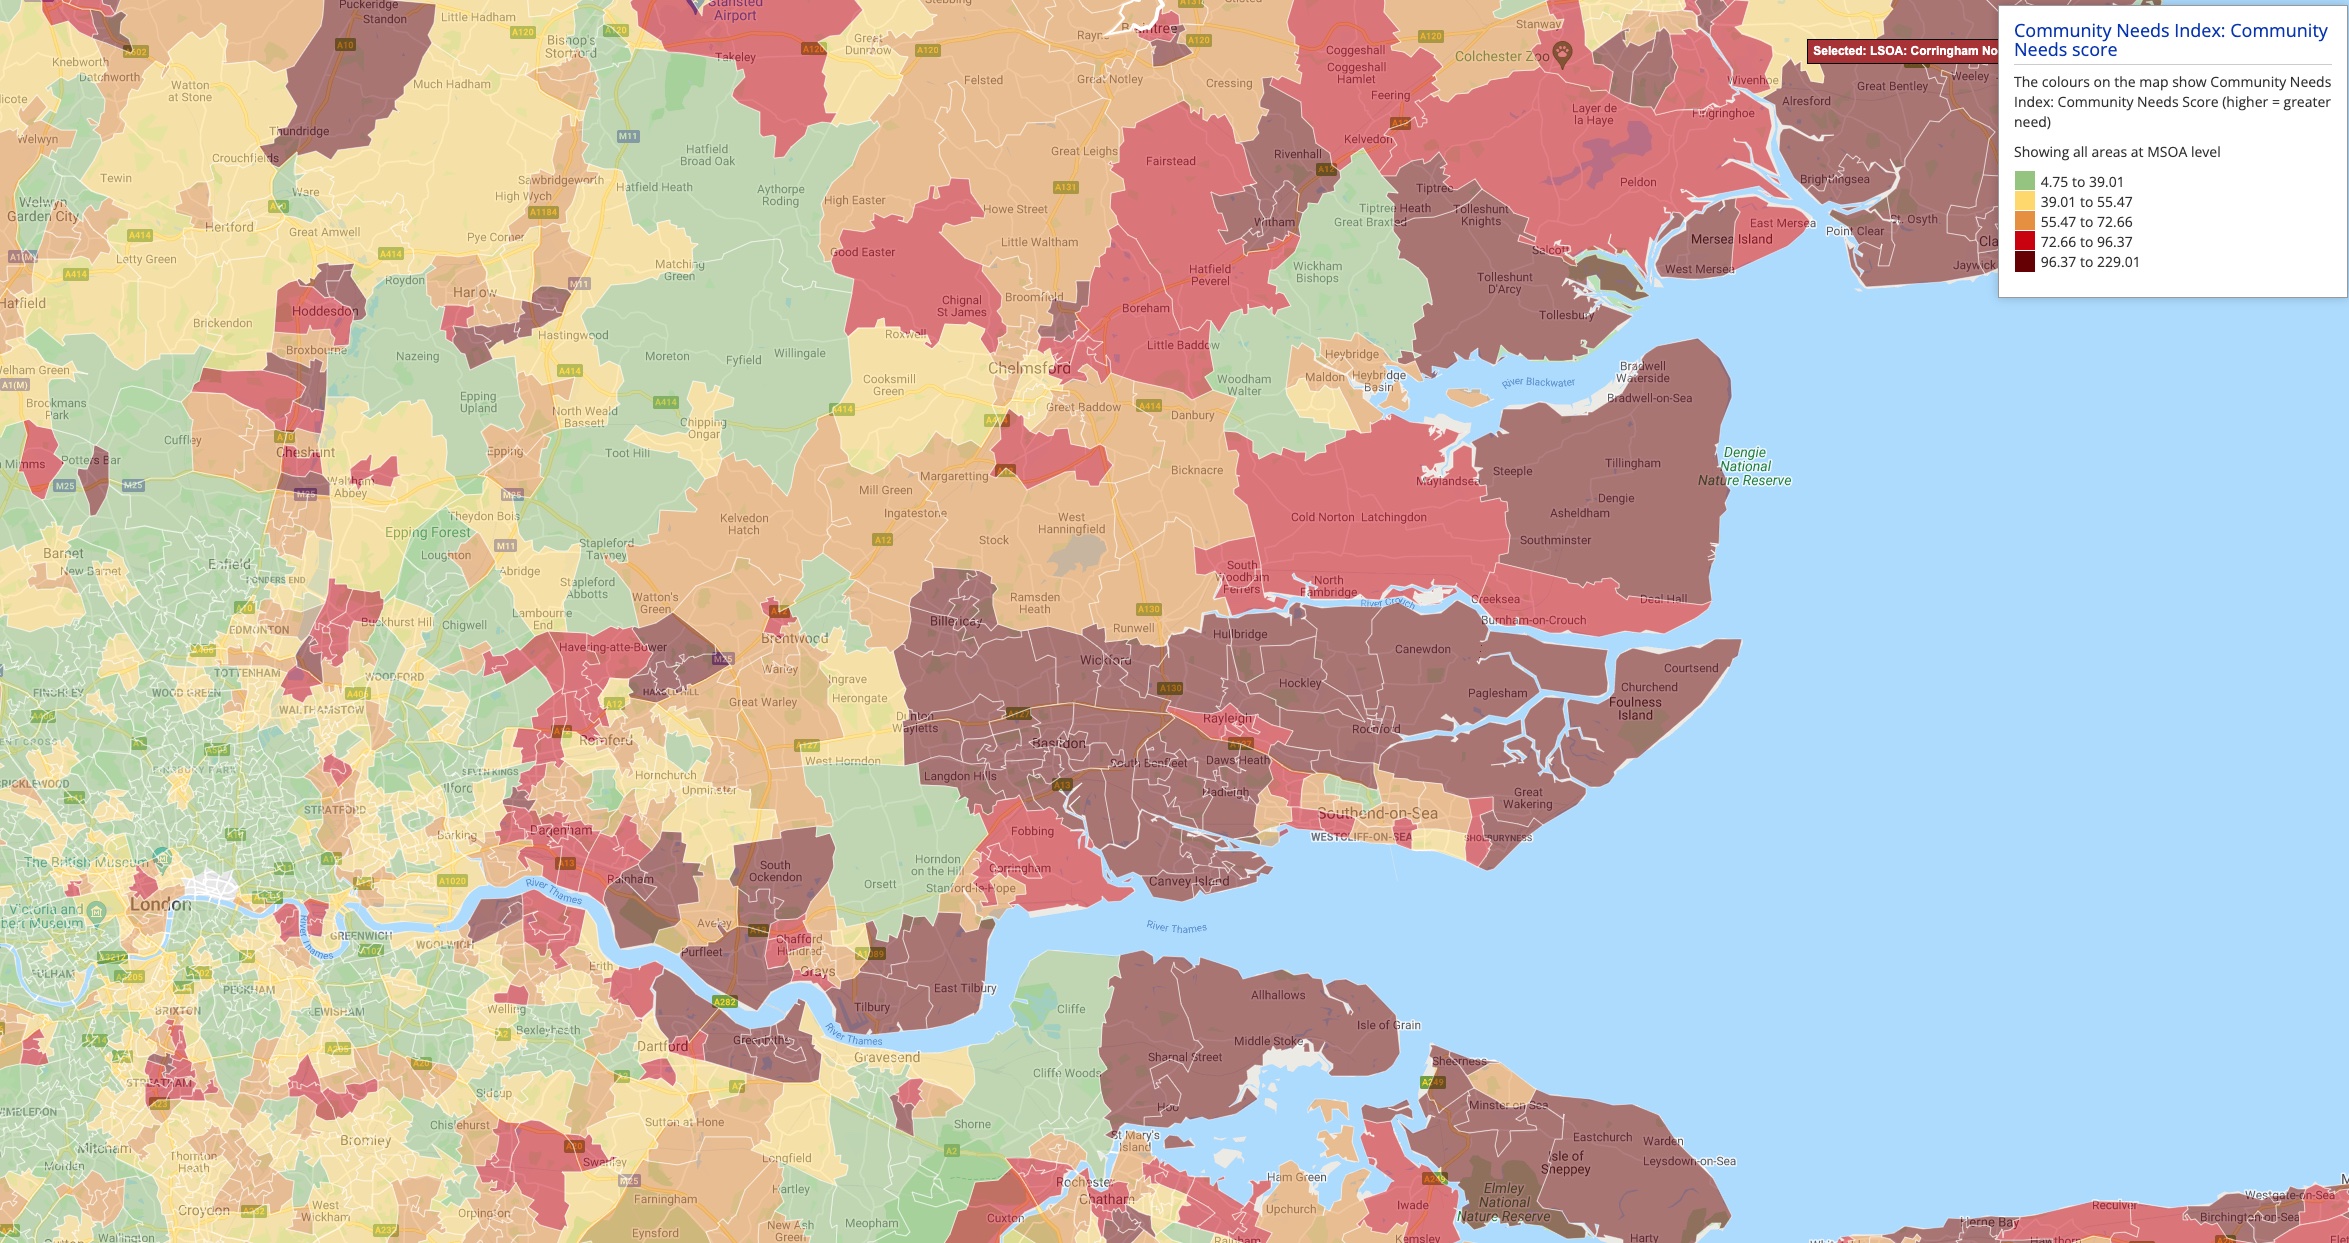 choropleth map of Essex County and its Community Needs Index scores